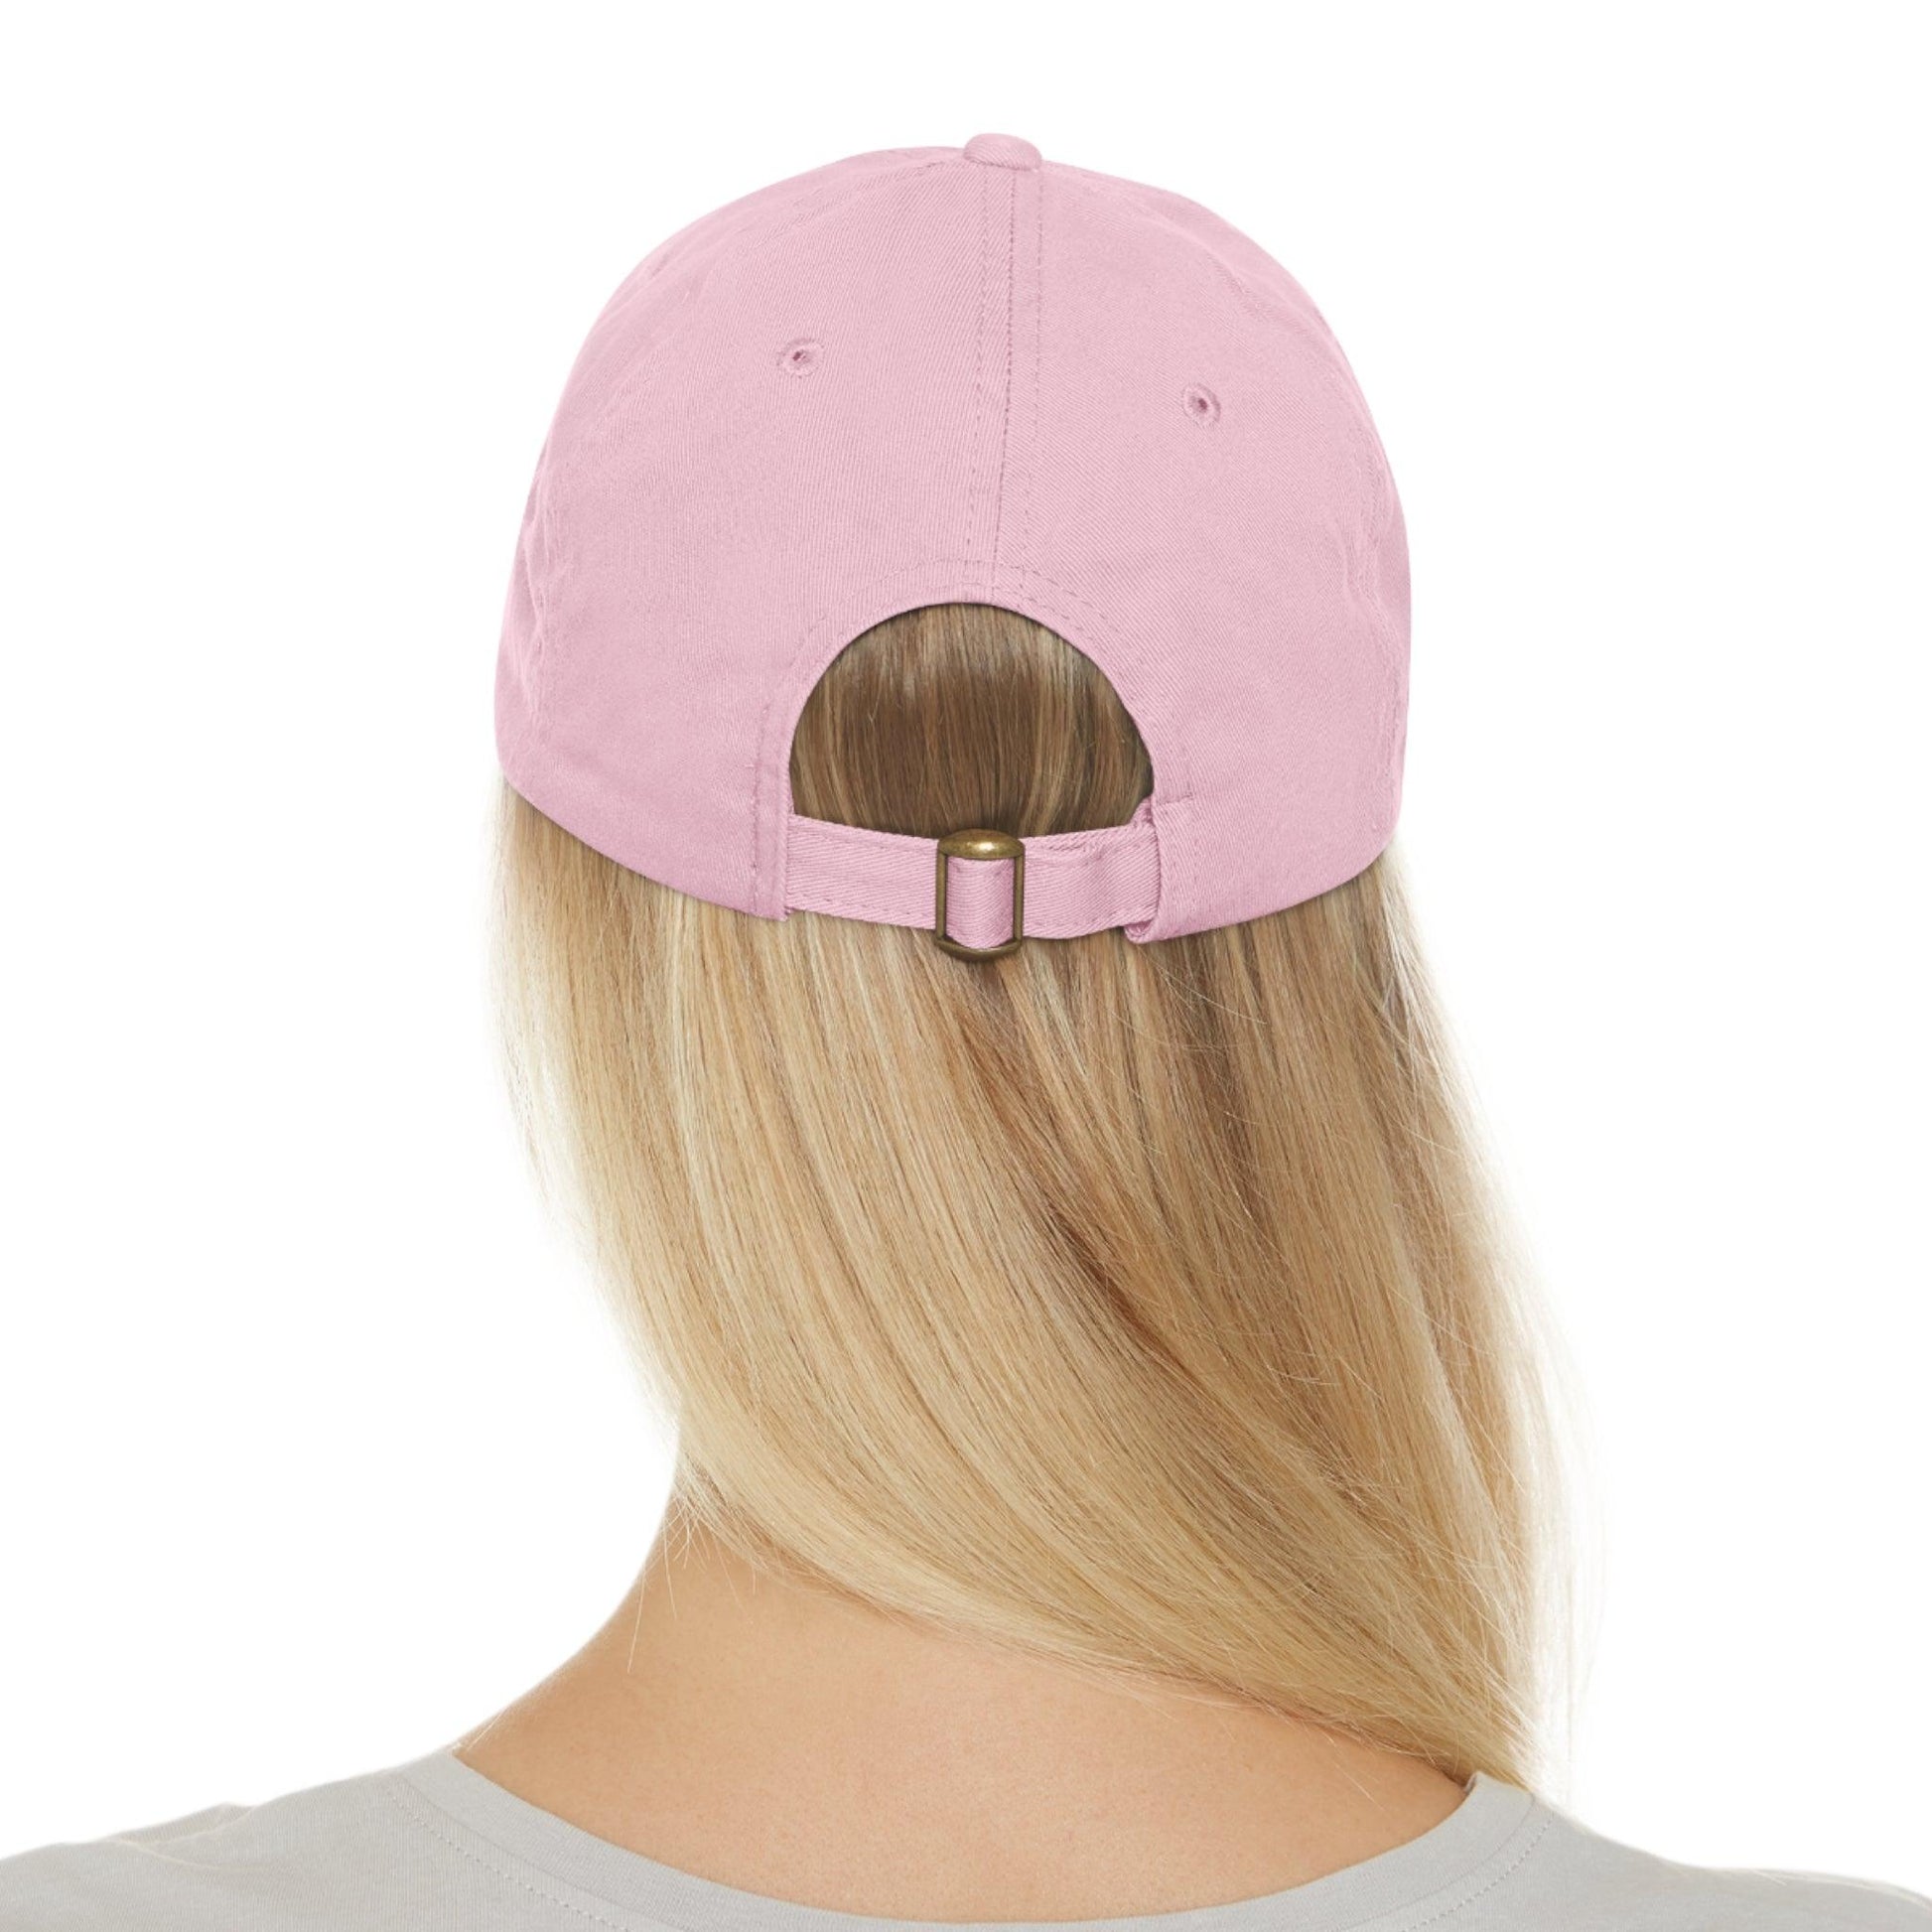 Proud to Be a Parrot Head Cap, Beach Hair Day Hat - Coastal Collections